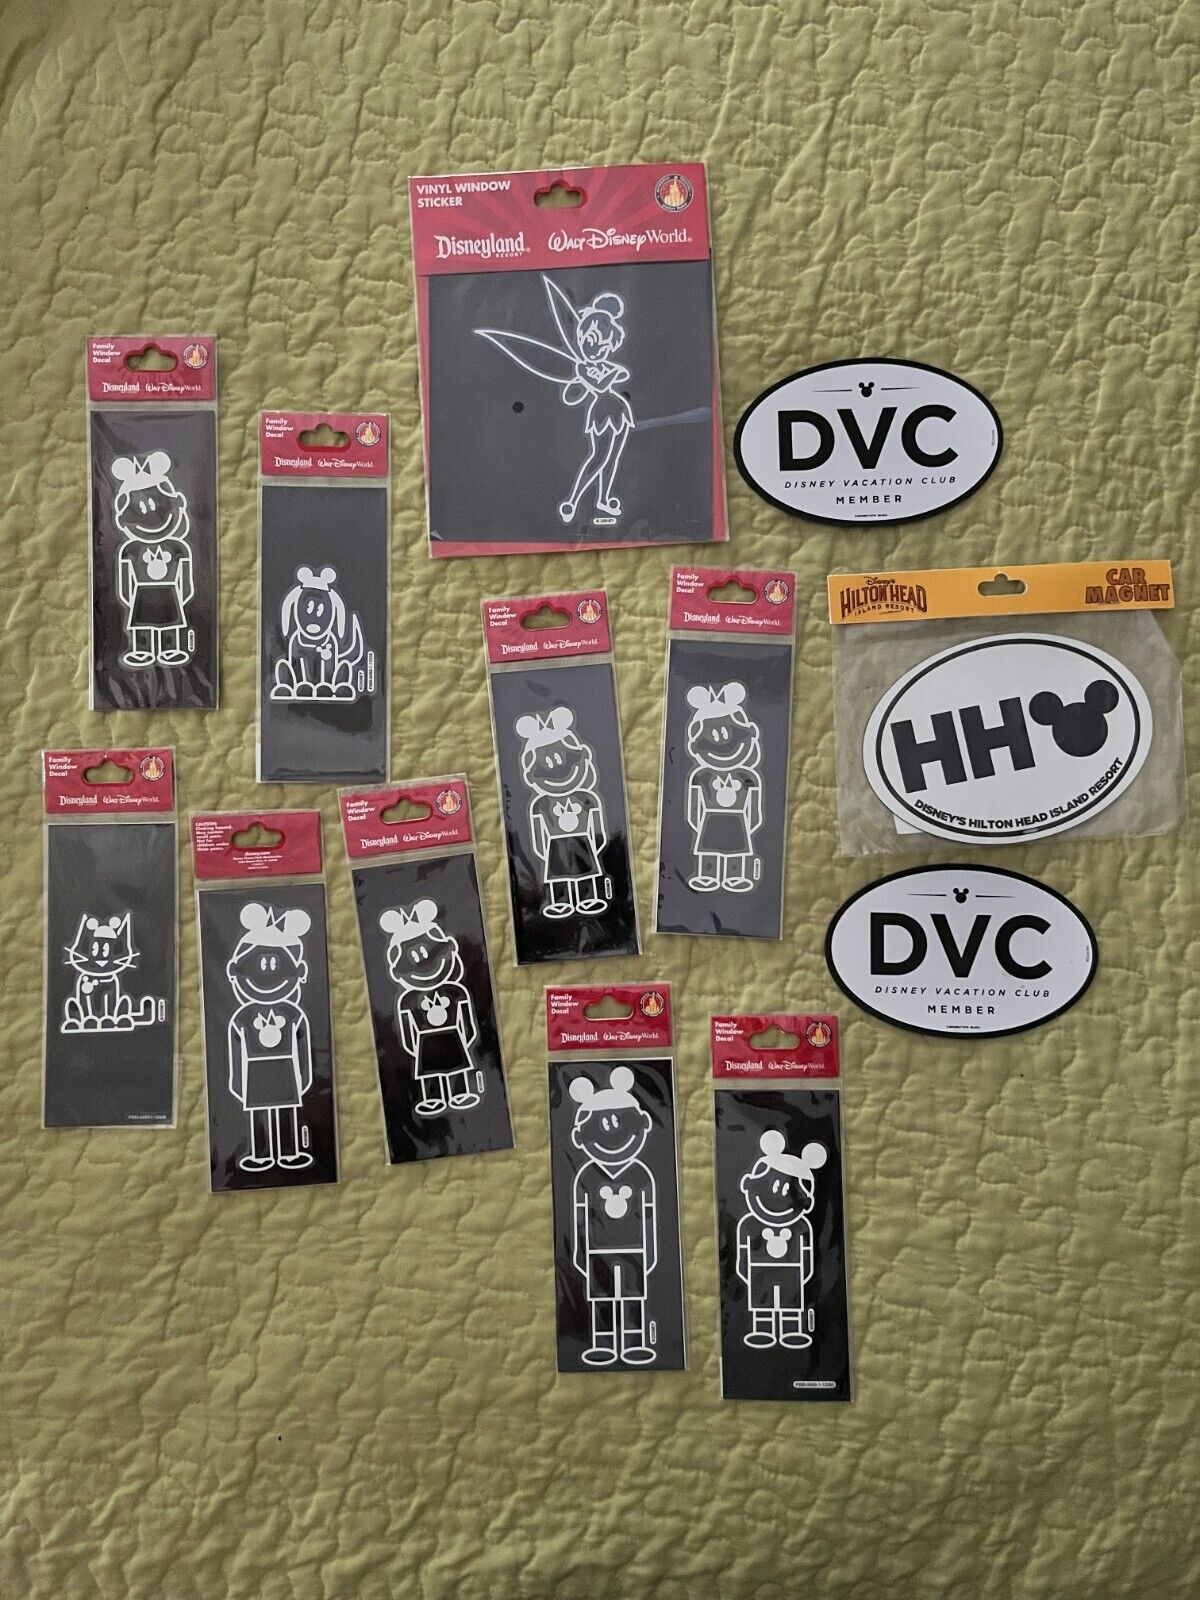 New Disney and DVC car magnets and vinyl stickers